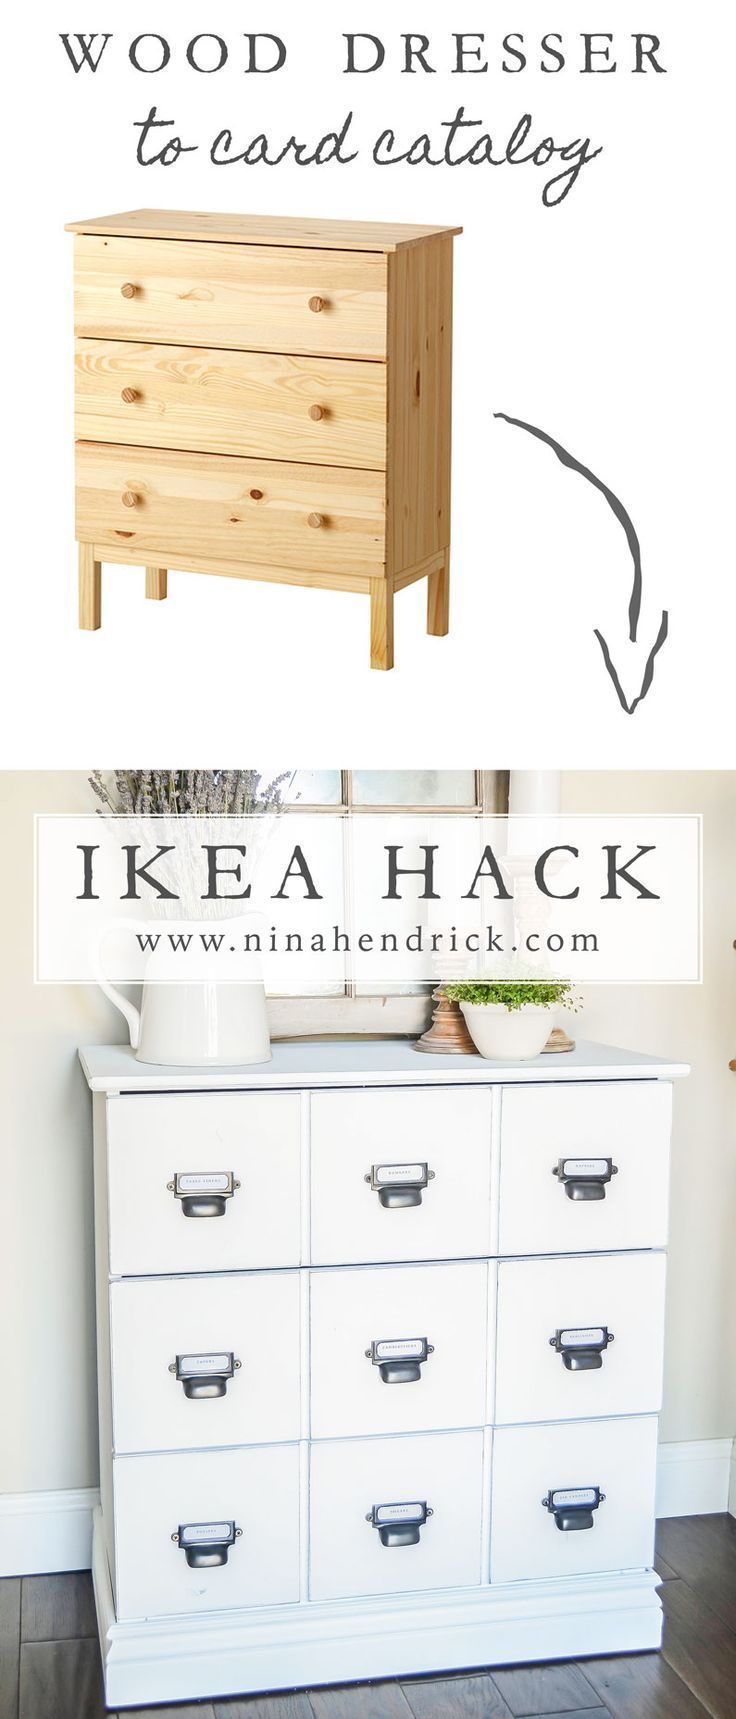 DIY Wood Dresser Card Catalog IKEA Hack Tutorial | See how you can easily and in...